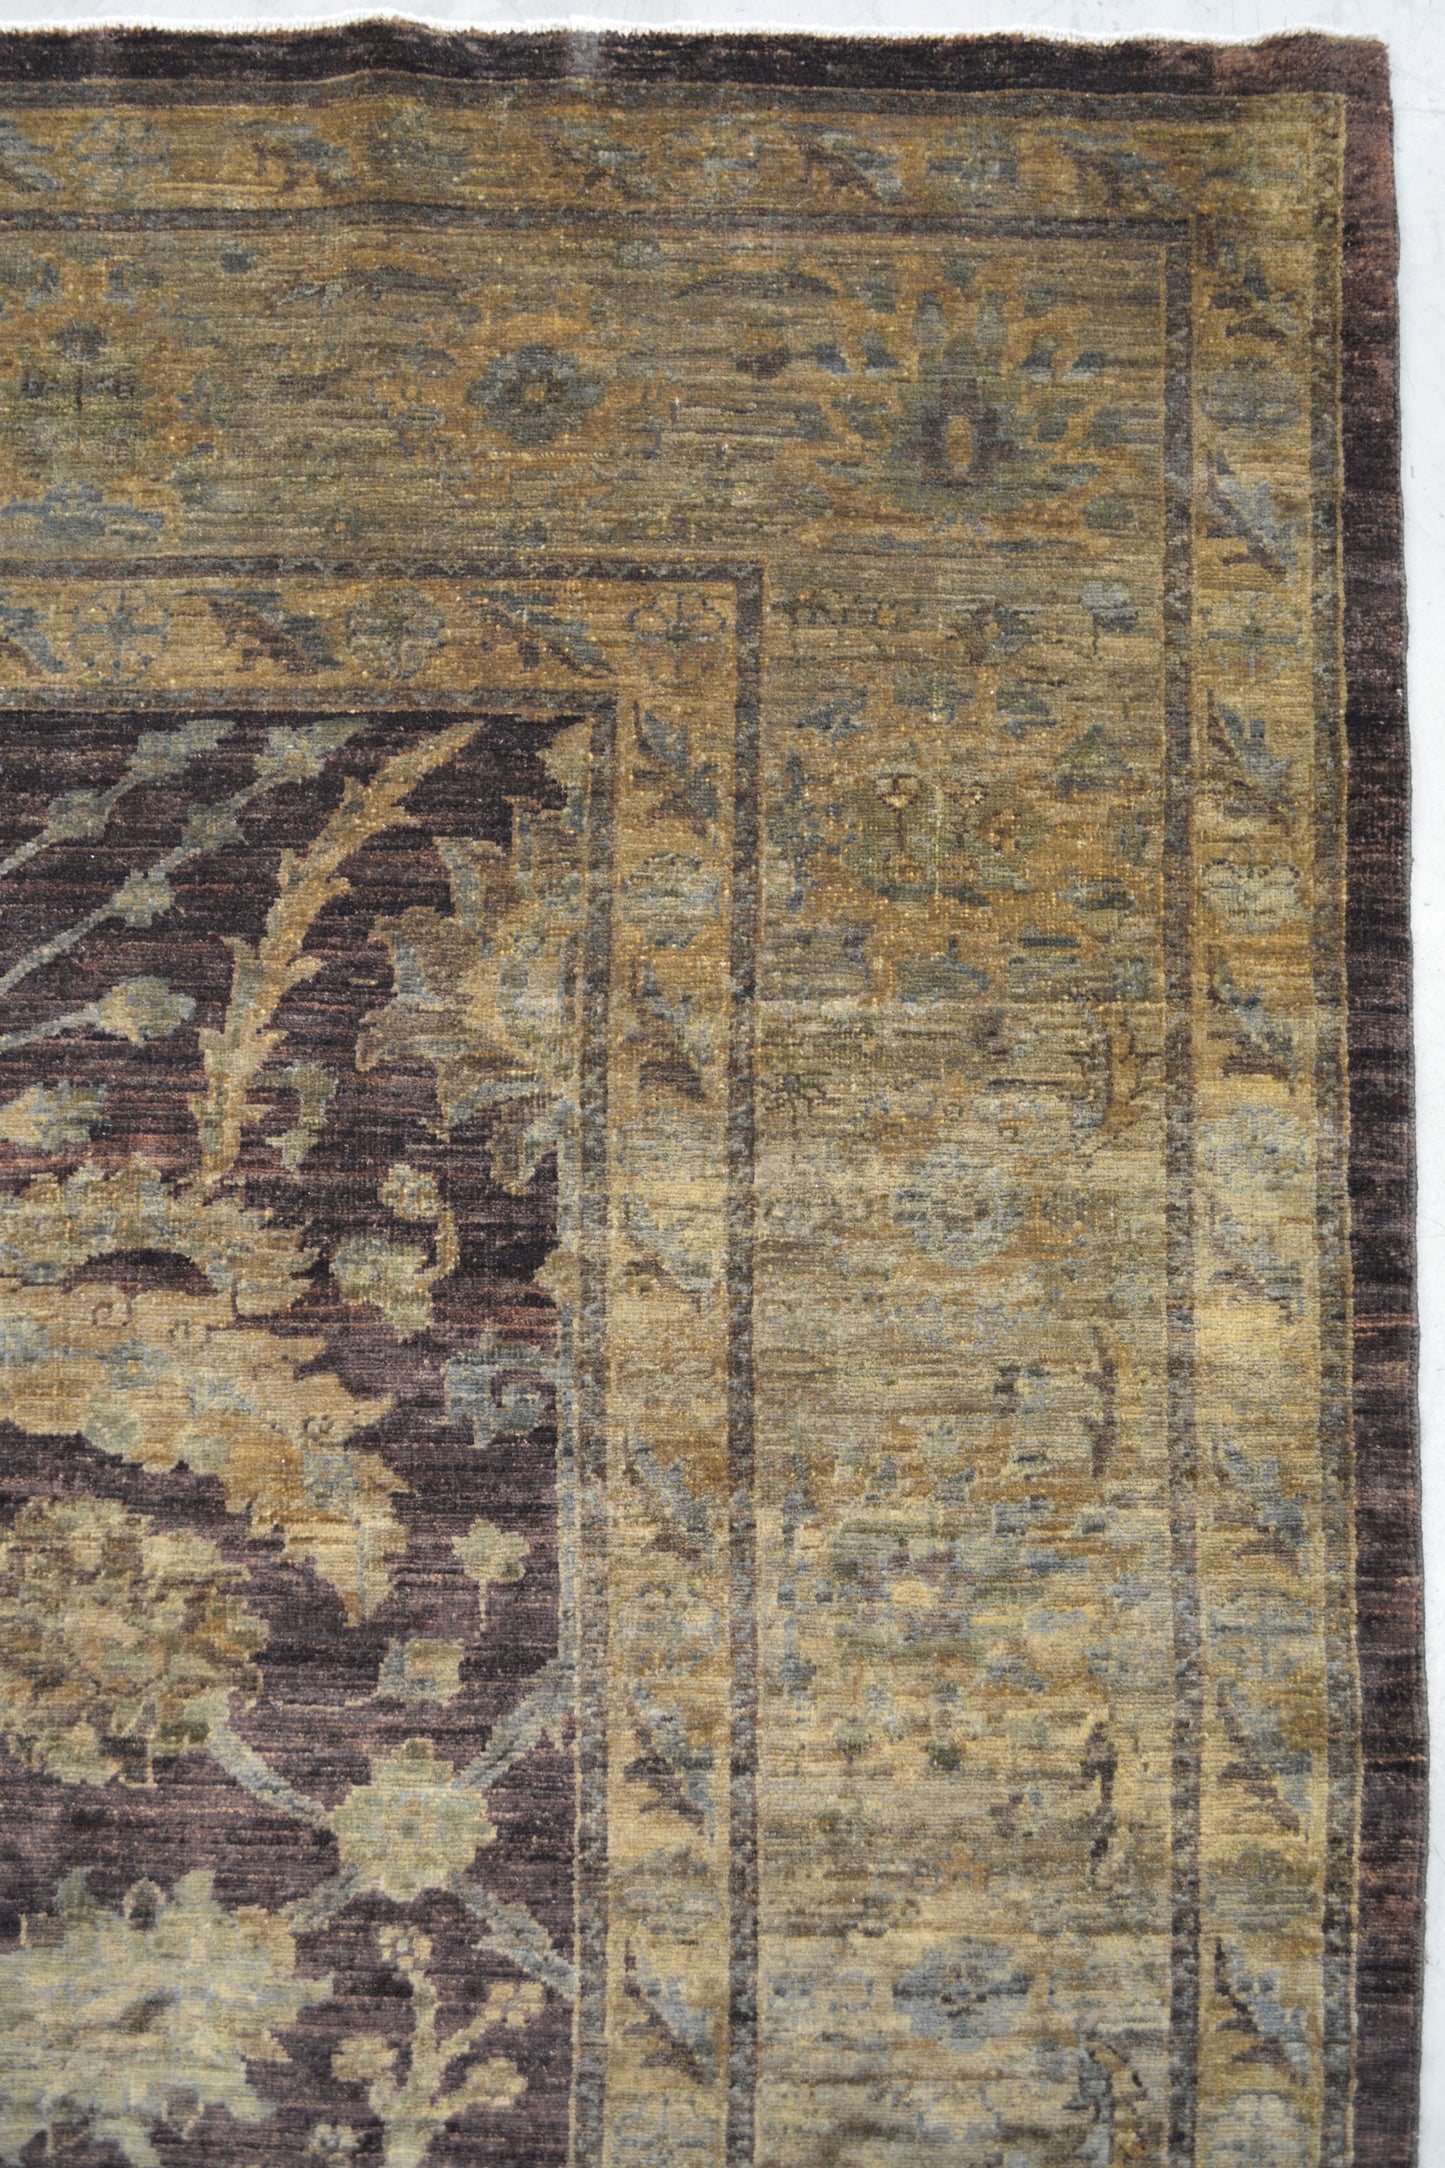 This impressive carpet has the multi frames in yellow with leaves and flowers' pattern.